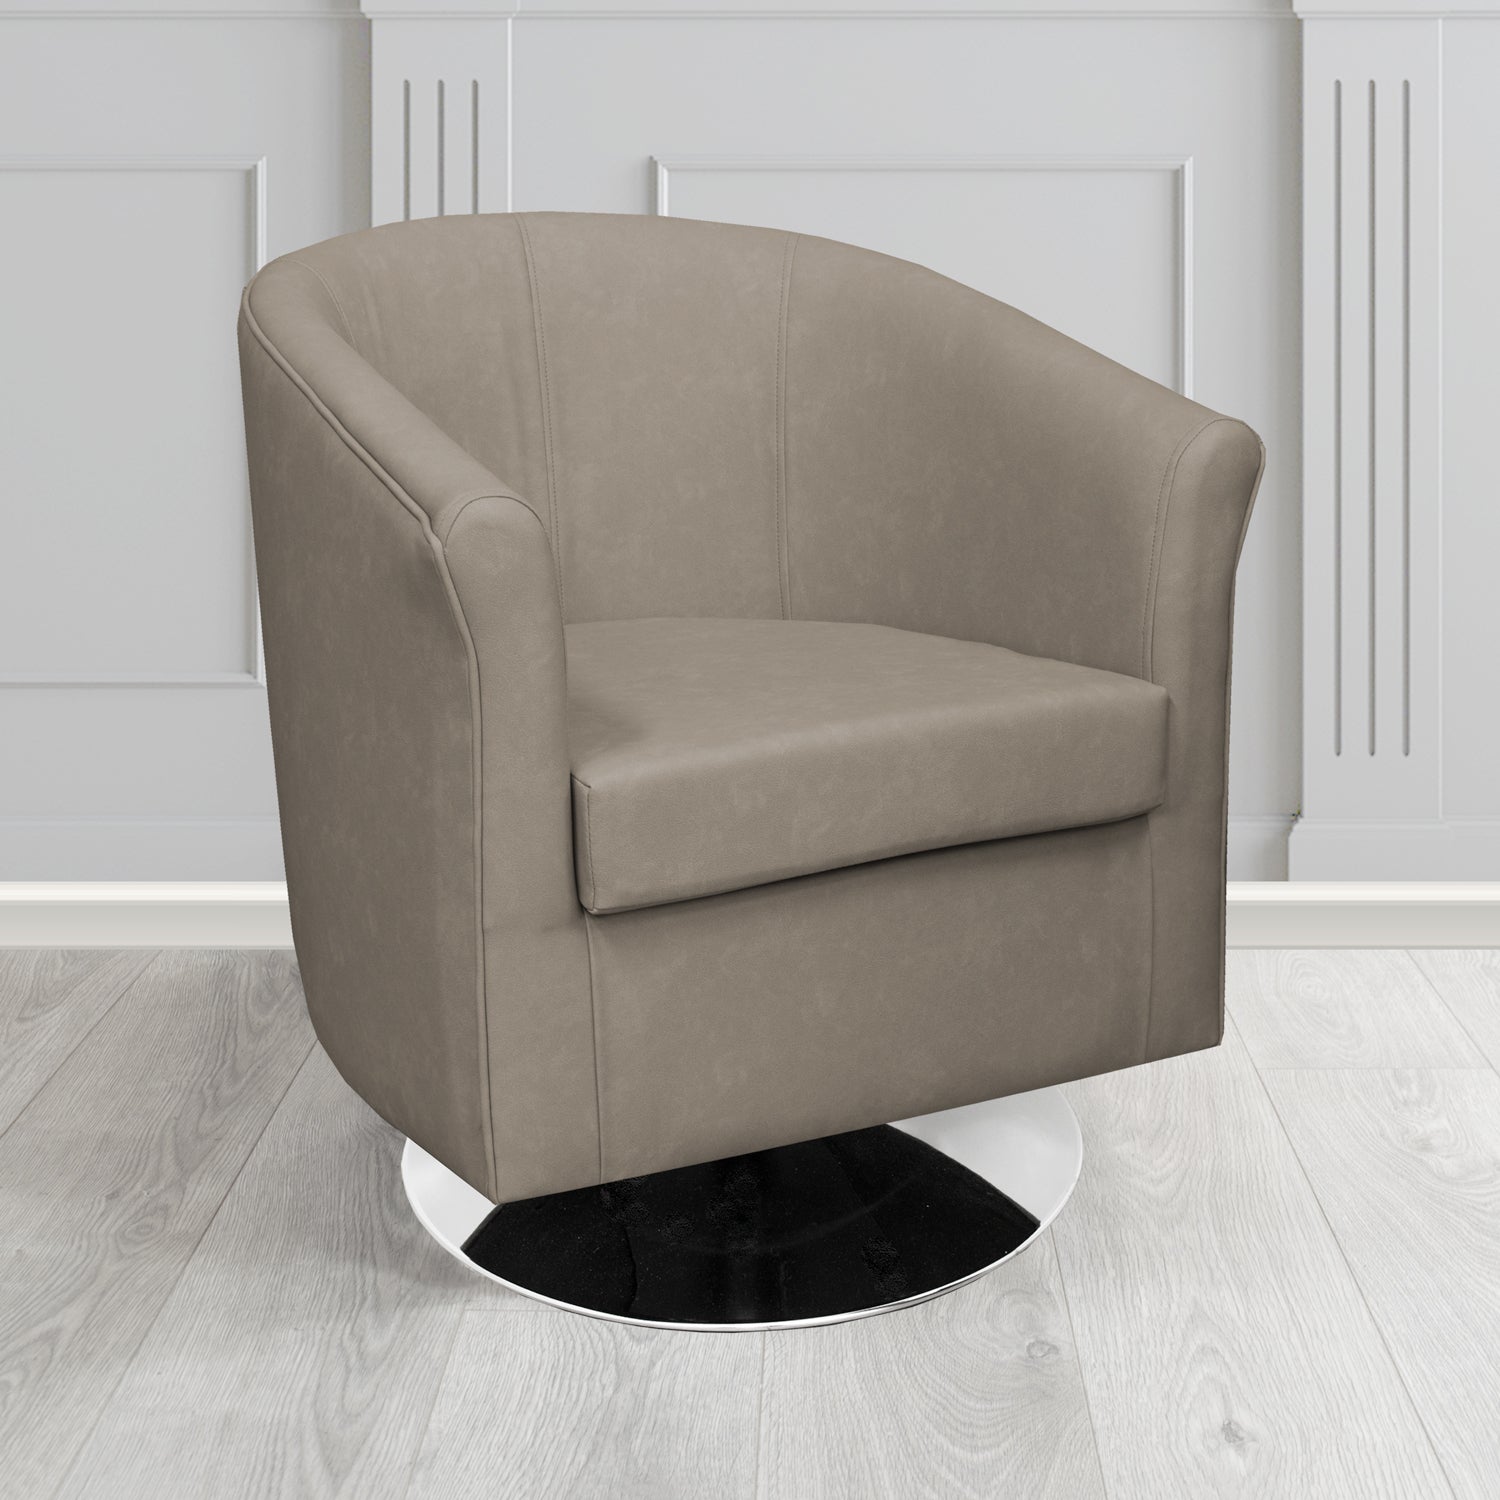 Tuscany Swivel Tub Chair in Infiniti Taupe INF1859 Antimicrobial Crib 5 Faux Leather - The Tub Chair Shop